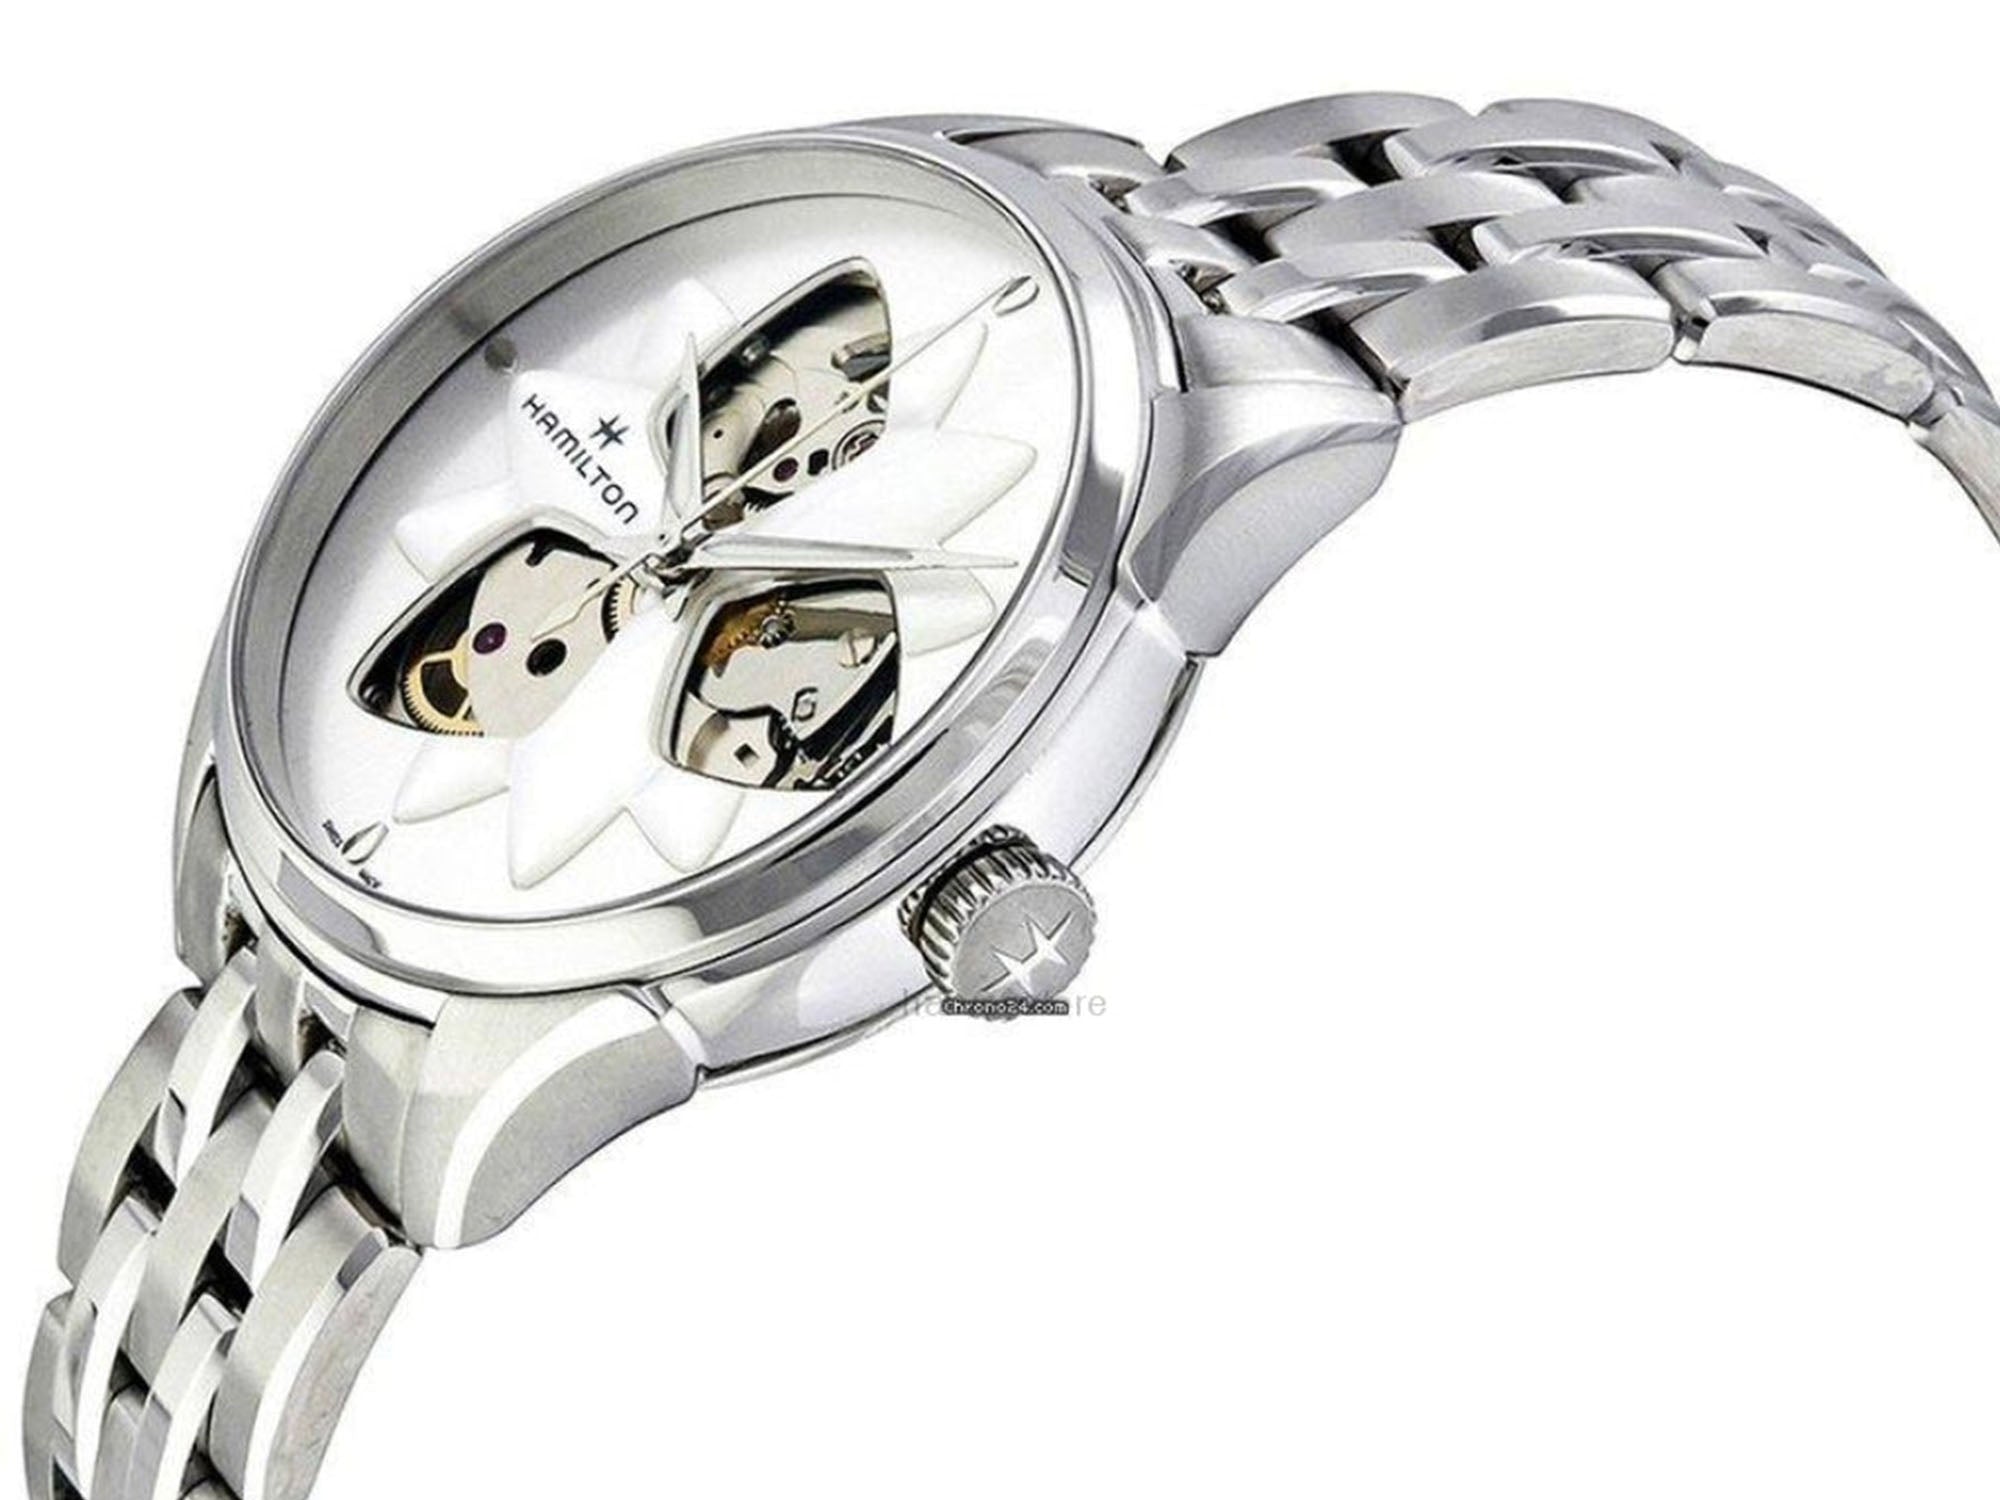 40 Best Women's Watches From Affordable to Luxury — Wrist Enthusiast